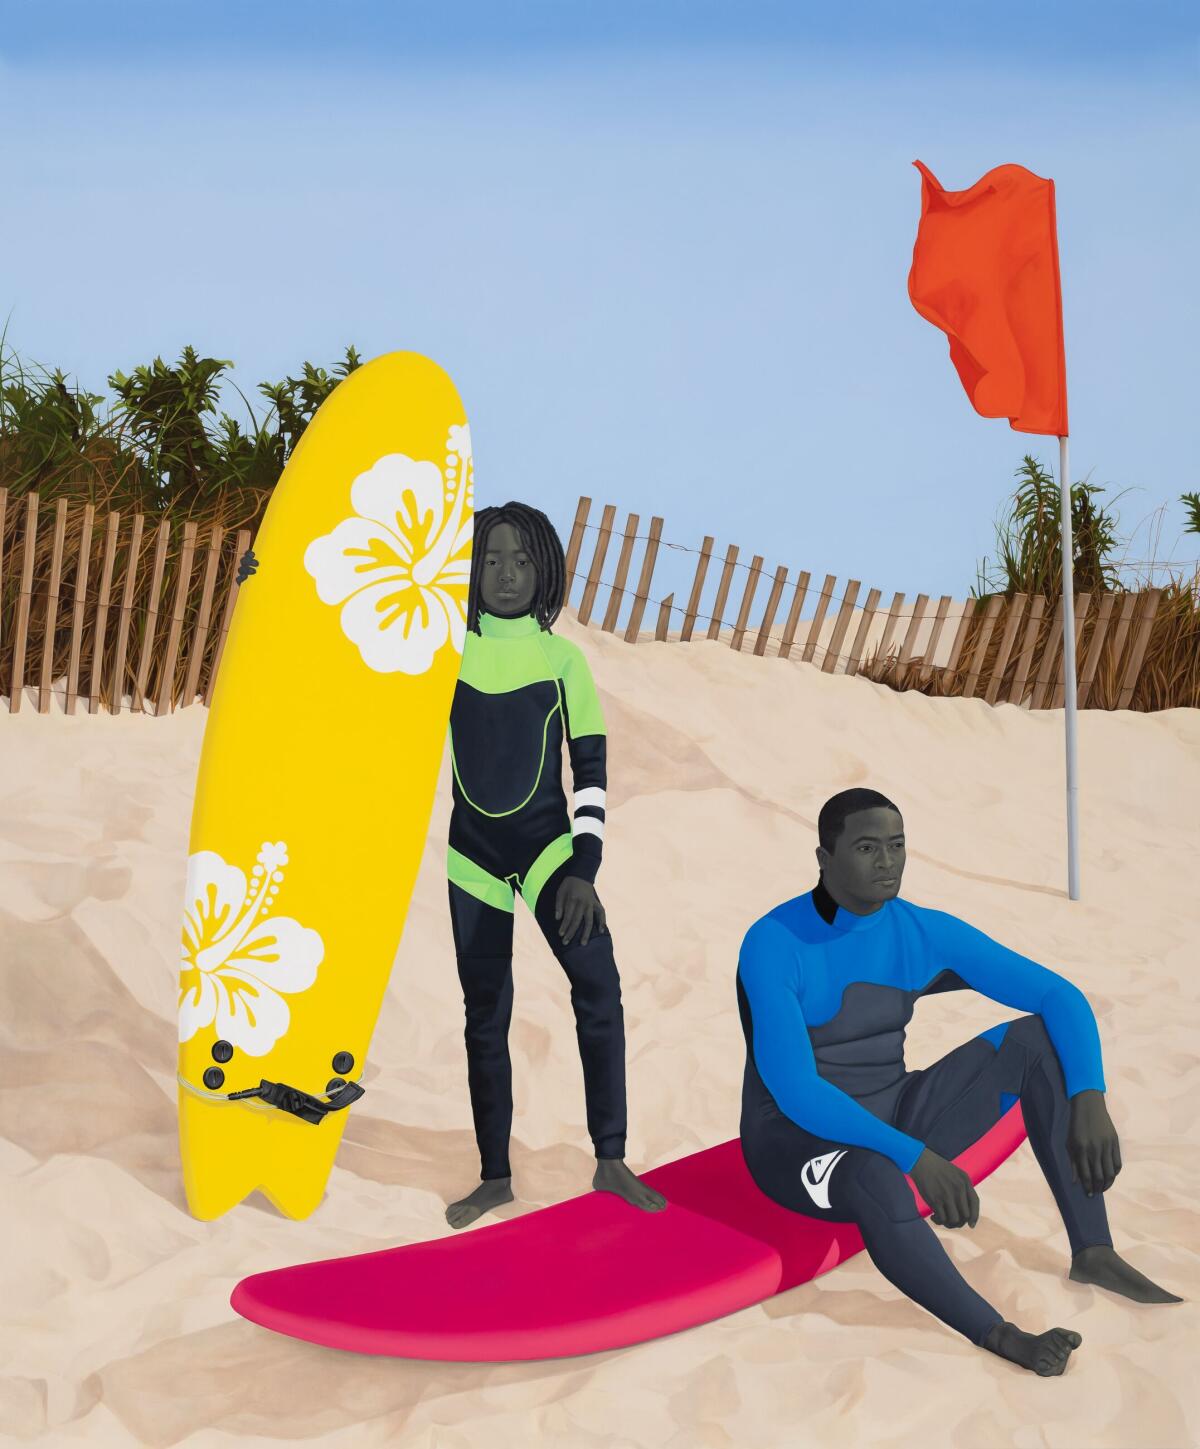 Artwork shows two young people in wetsuits at the beach with their surfboards.